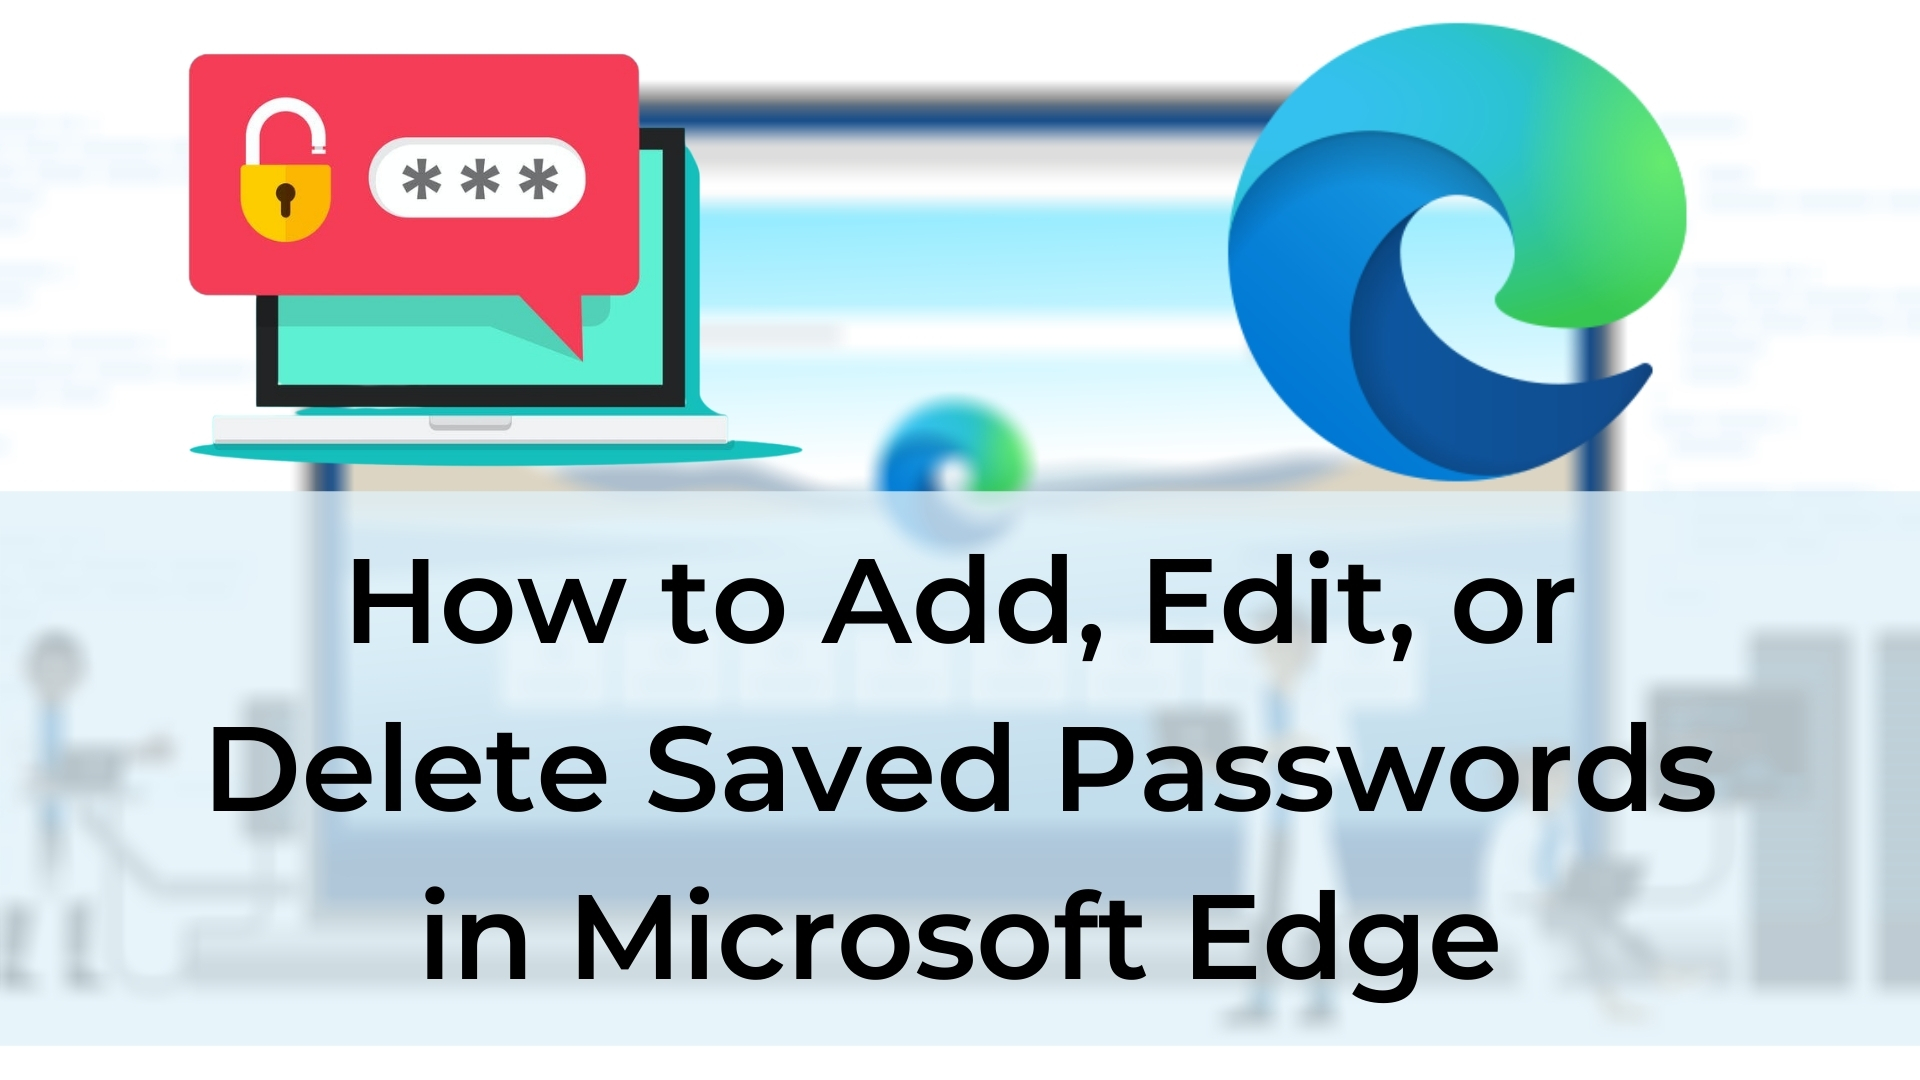 How to Add, Edit, or Delete Saved Passwords in Microsoft Edge